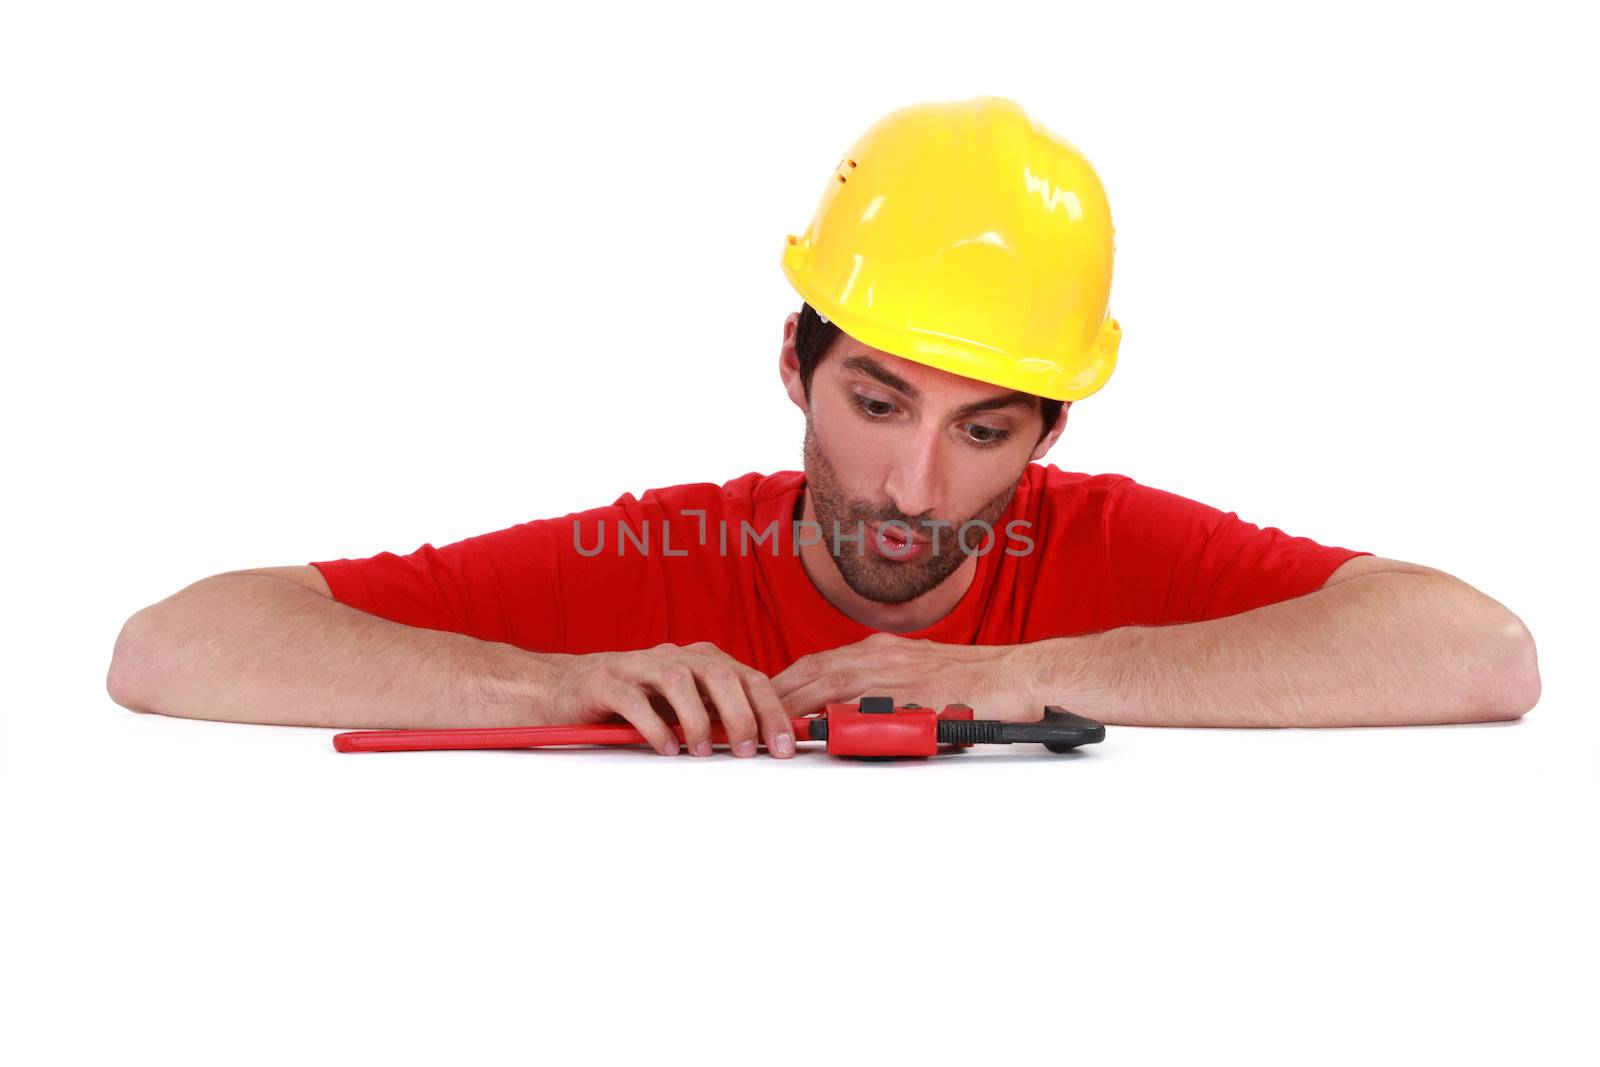 Plumber looking at his tool surprisingly